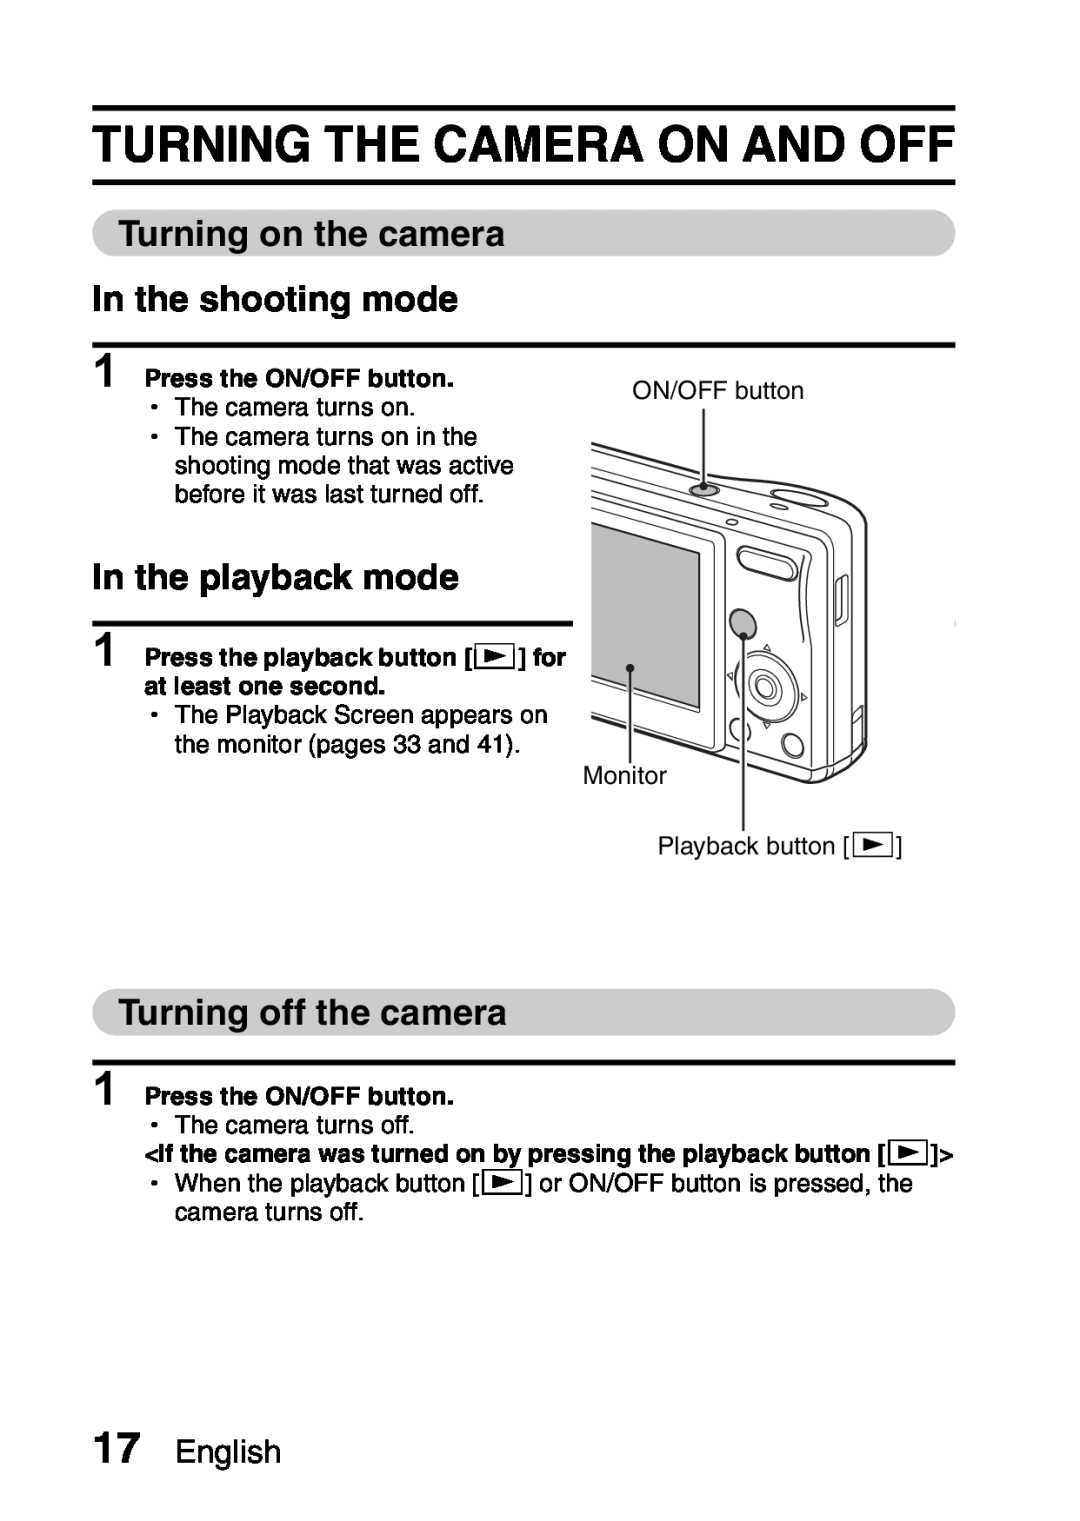 Sanyo VPC-S60 Turning The Camera On And Off, Turning on the camera In the shooting mode, In the playback mode, English 